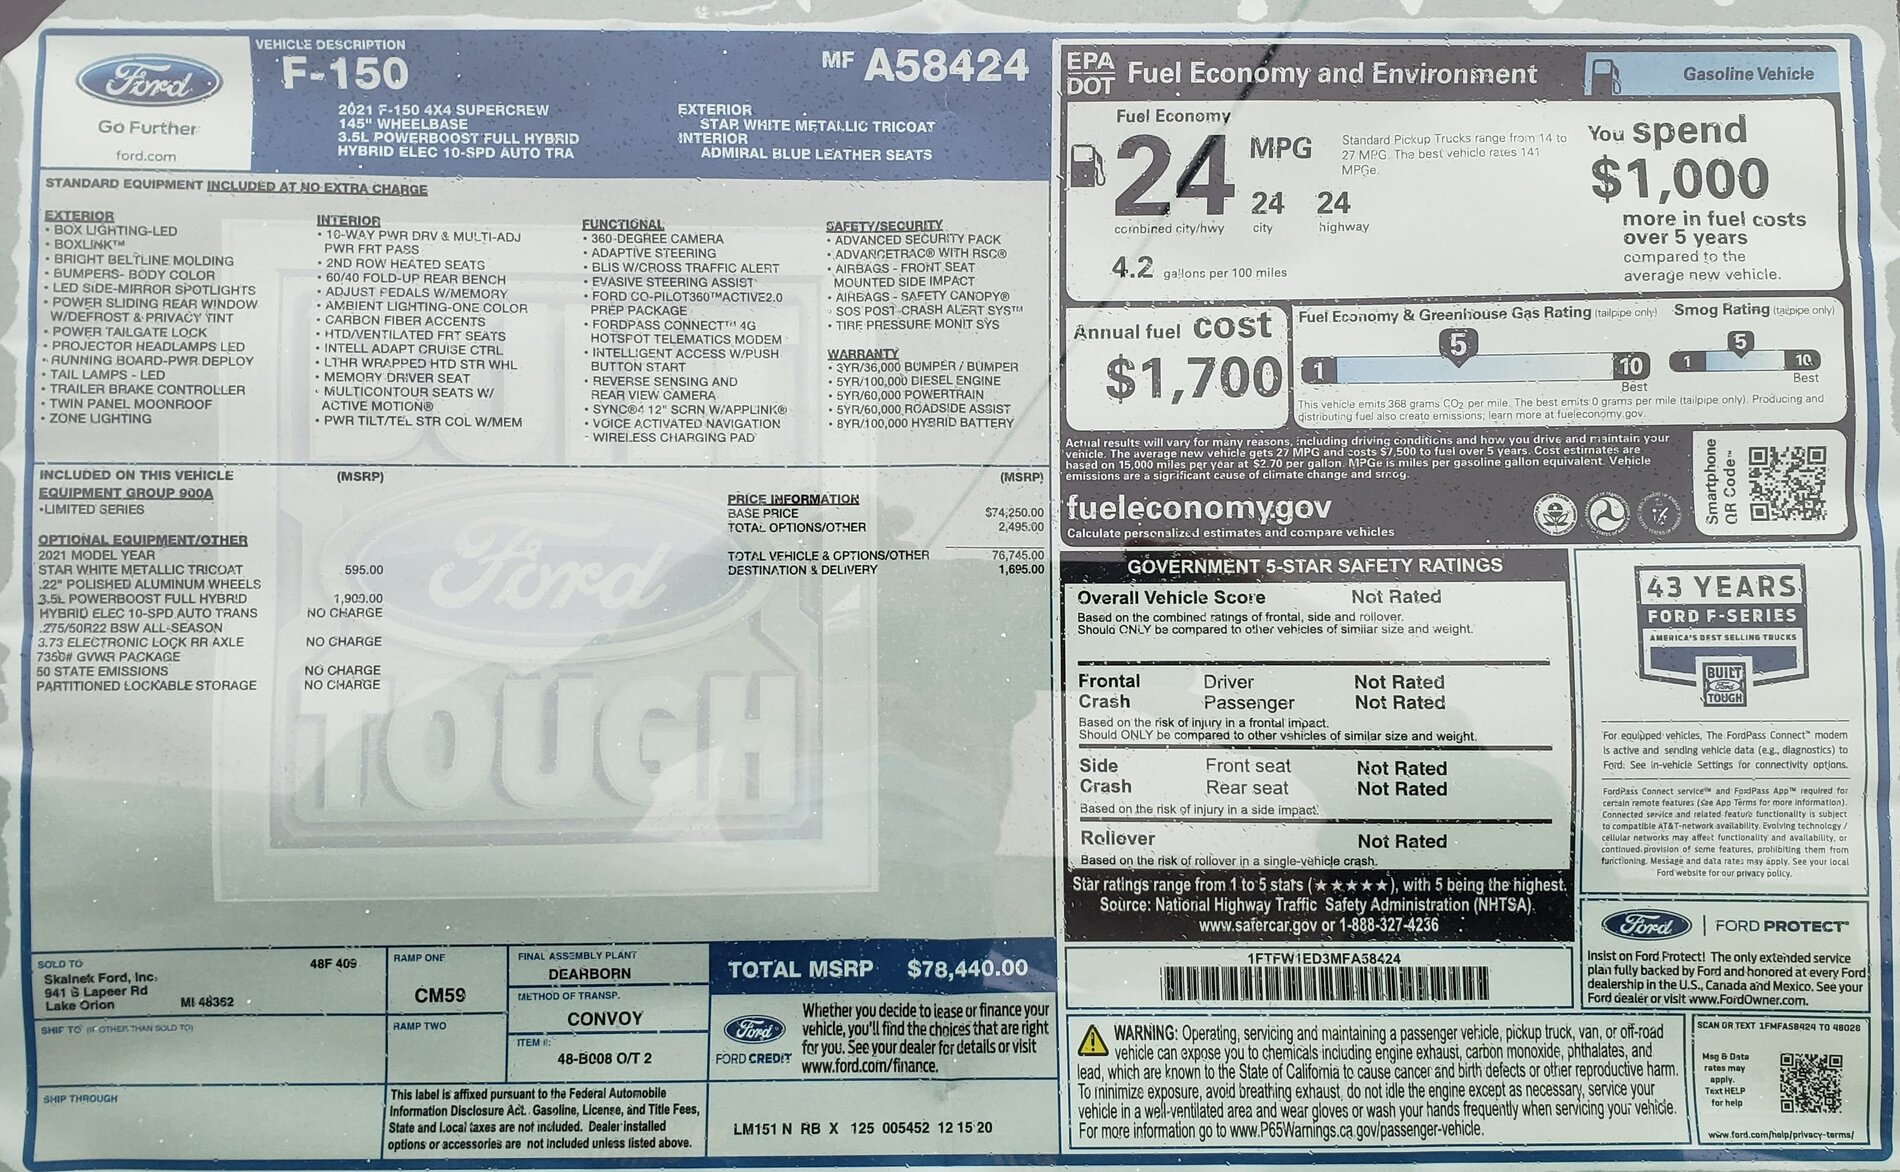 Ford F-150 Lightning 2021 F-150 Payload Stickers 2021-01-11 10.45.18